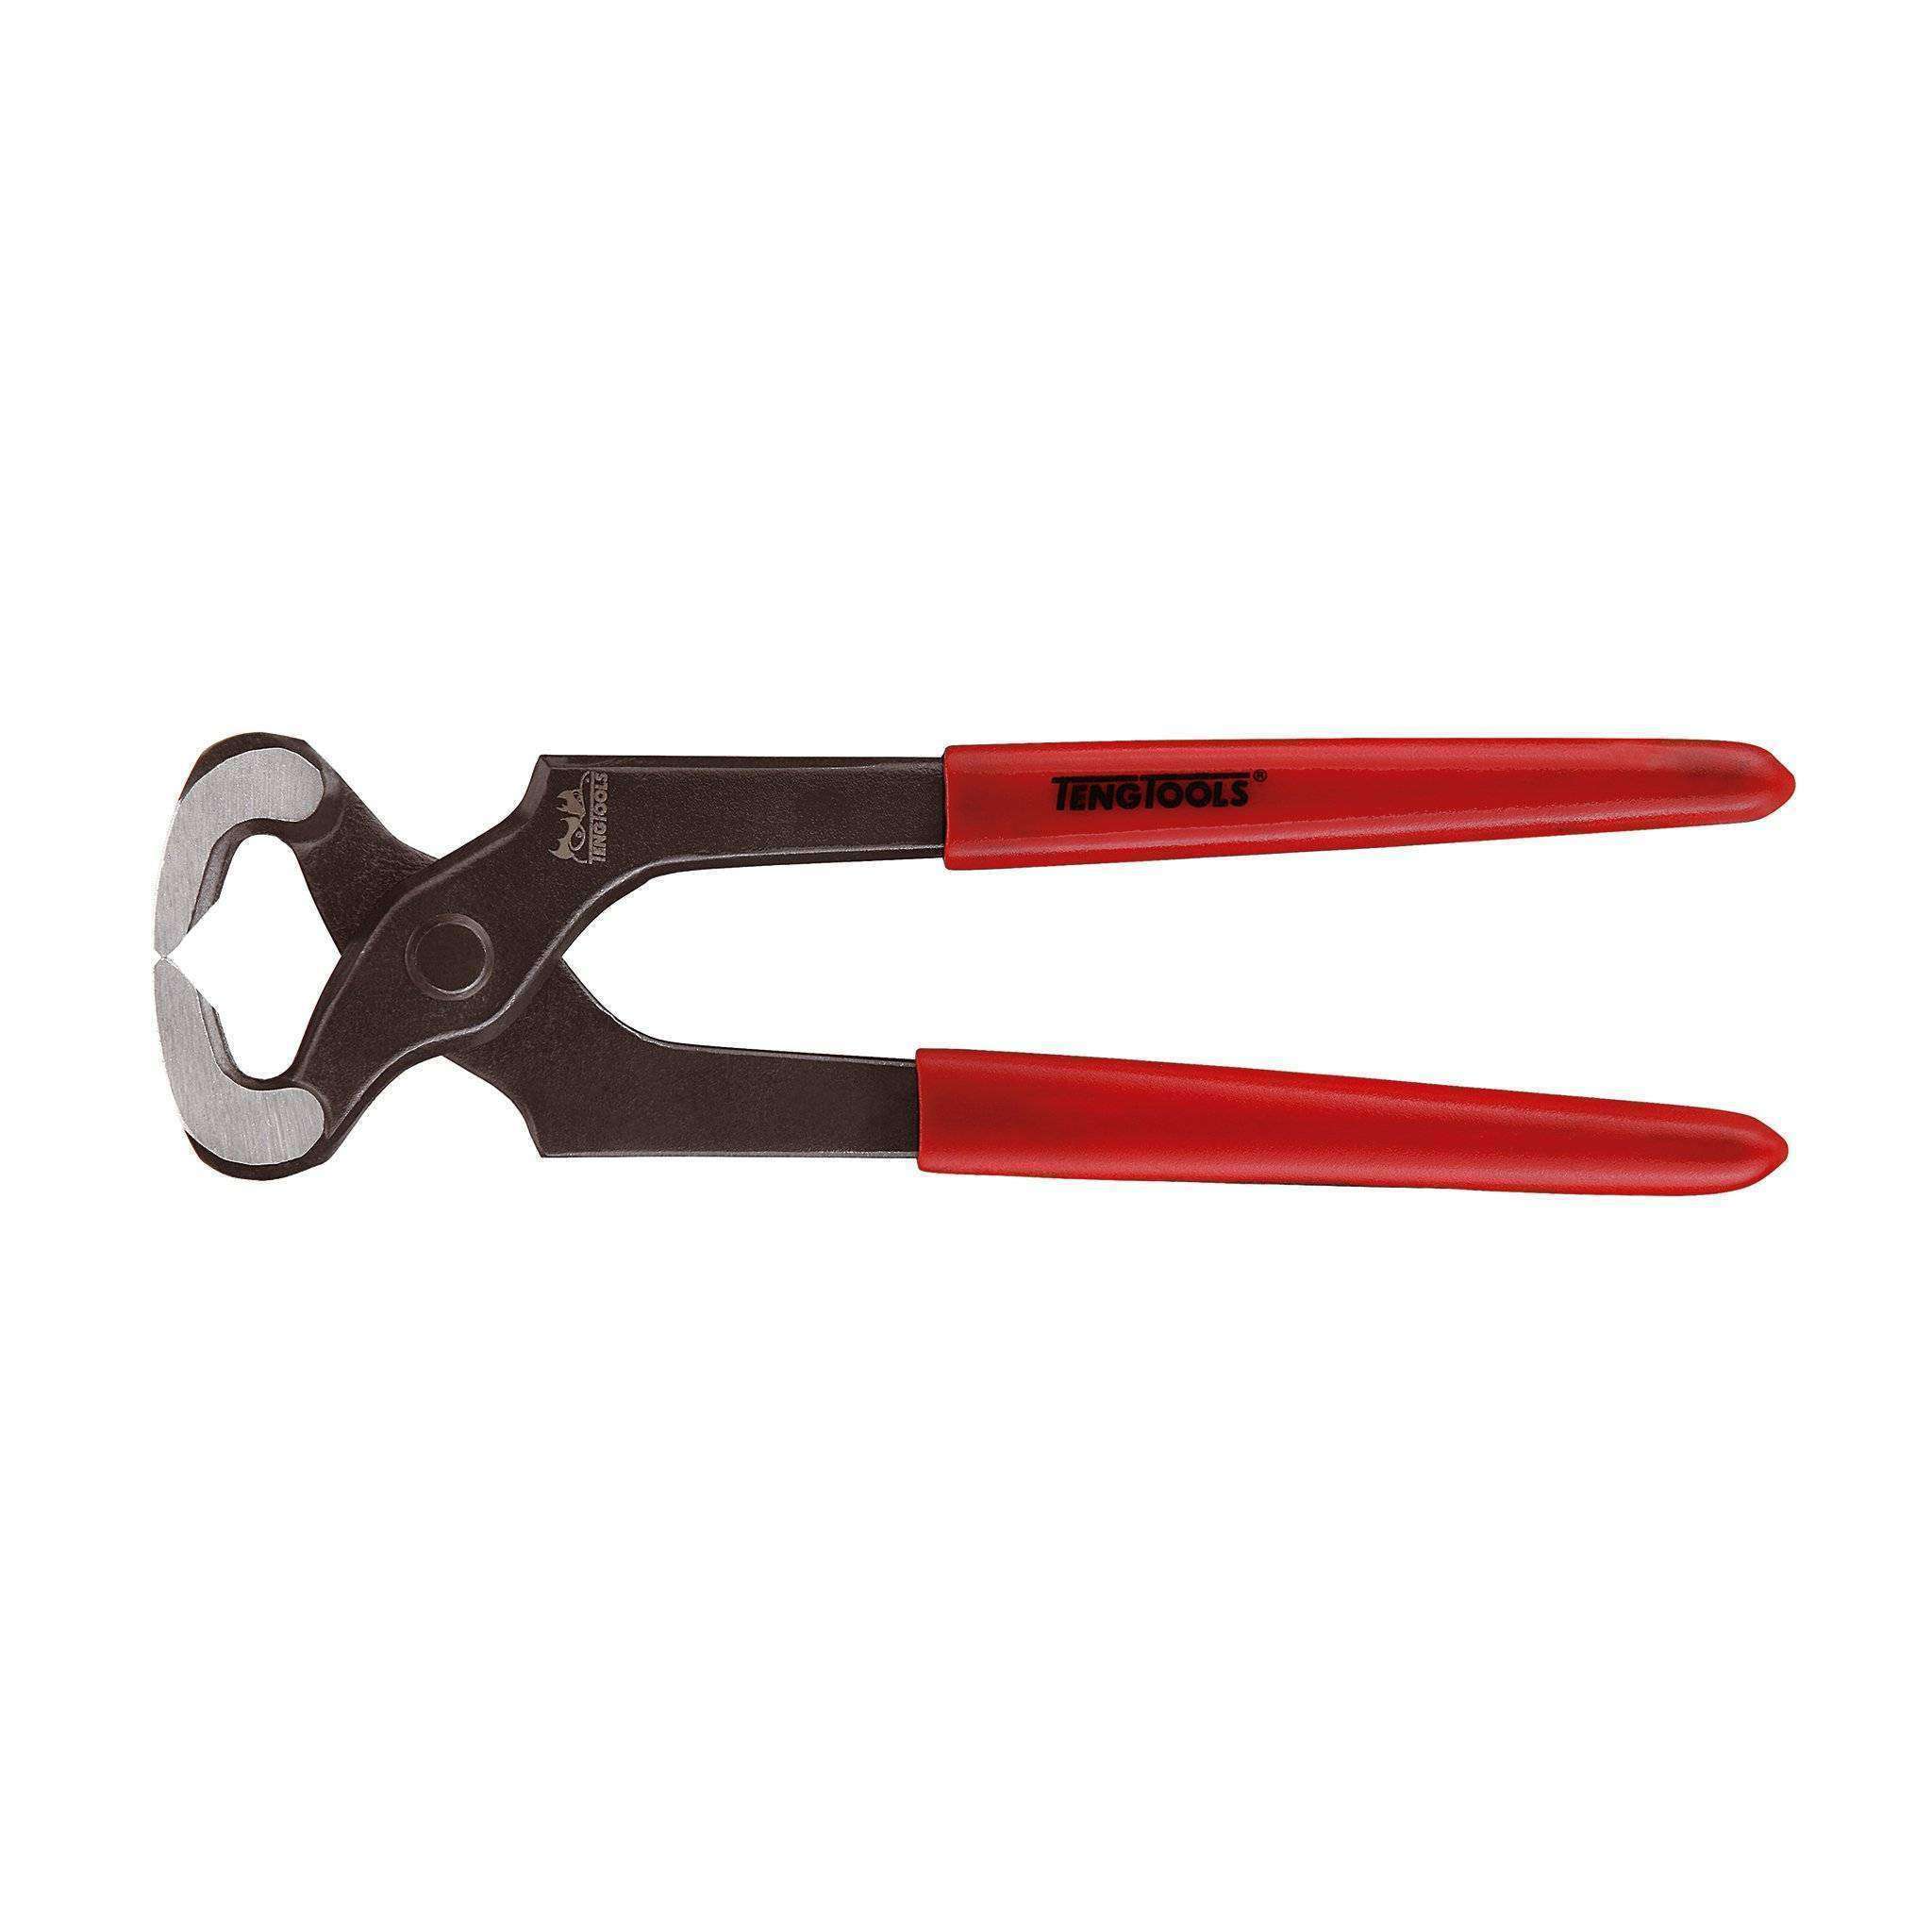 Teng Tools 7 Inch Carpenters Pincers End Cutting Pliers - MB489-7